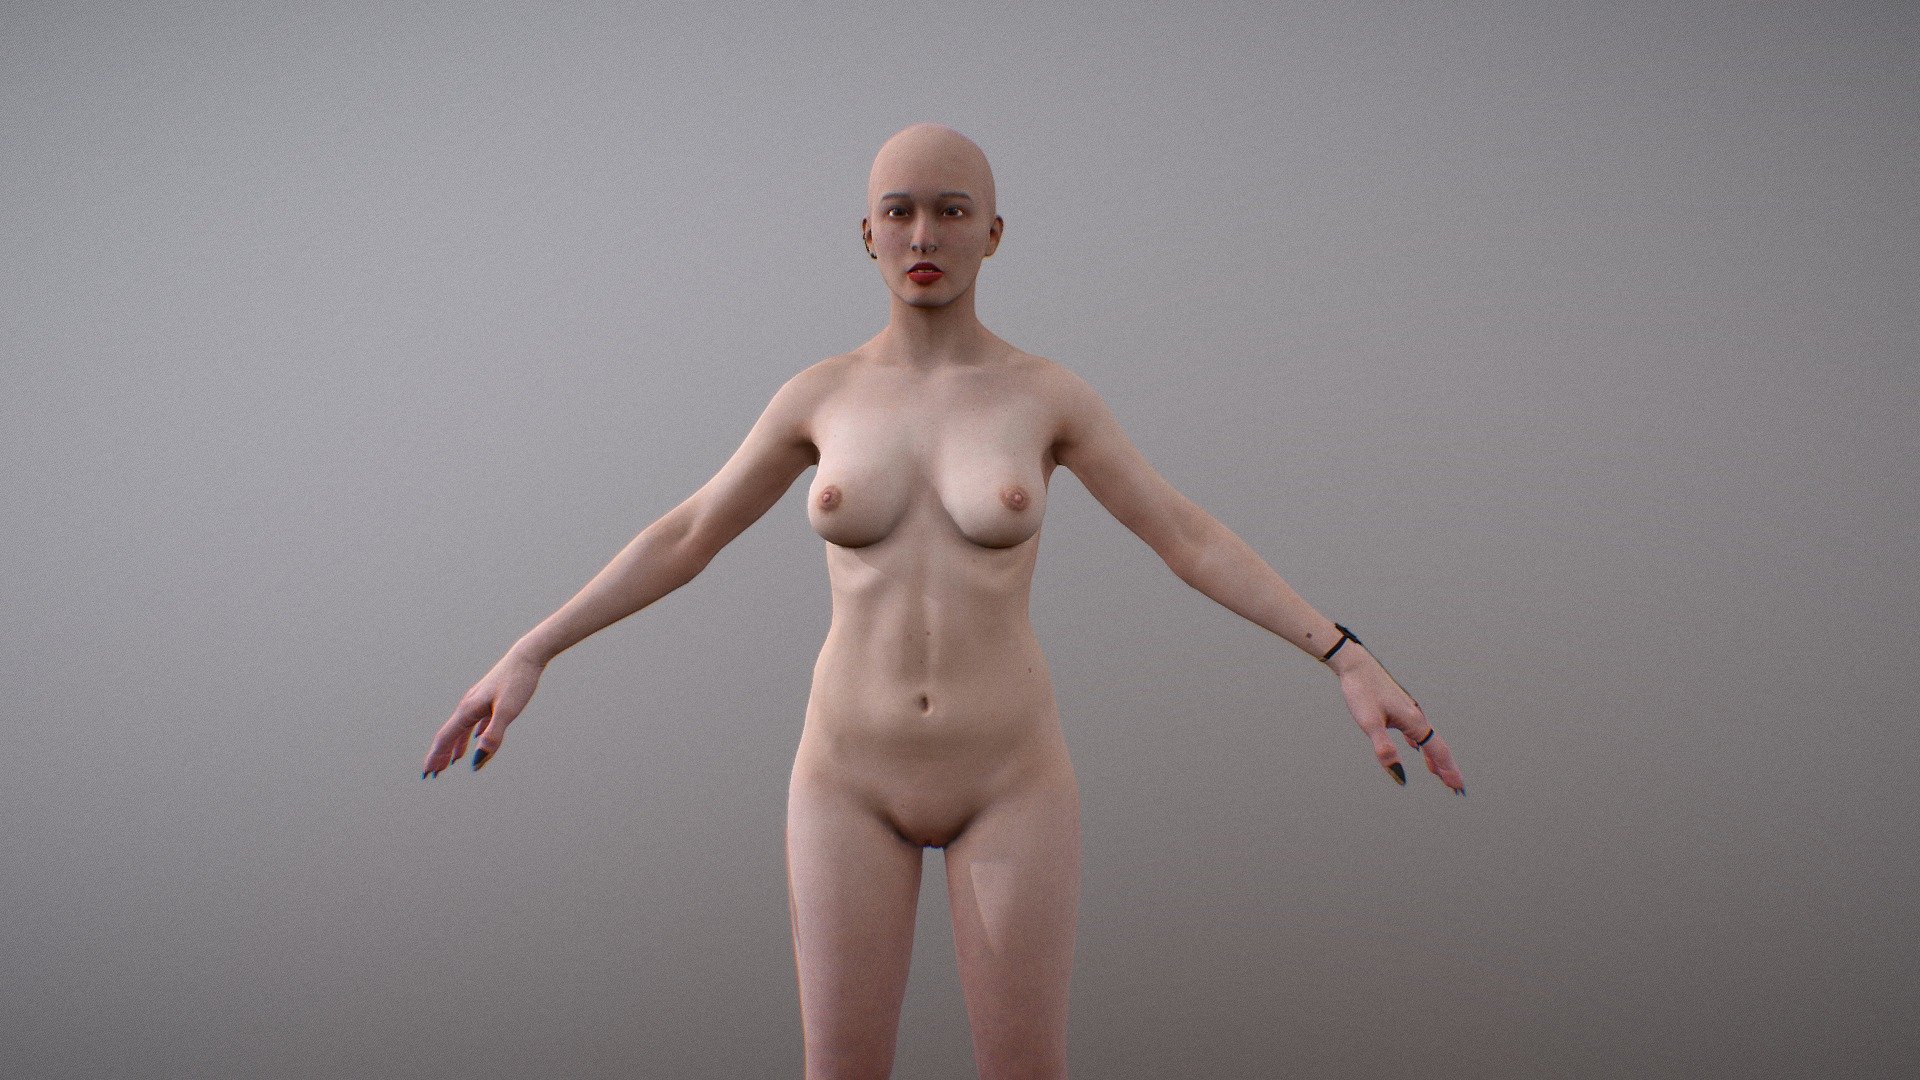 This is our first naked female character 3D Model, very highly detailed and is in a experimental fase, this model can be equipped with your own clothing, this model is soley for a basic startup for a realistic female characters. The textures are up to 2k resolution.

You can contact us via: granddogstudiohelp@gmail.com

Please do not forget to credit us for using this 3D Model! - Realistic Naked Female (EXPERIMENT) - 3D model by SanForge Studio (@SanForge) 3d model